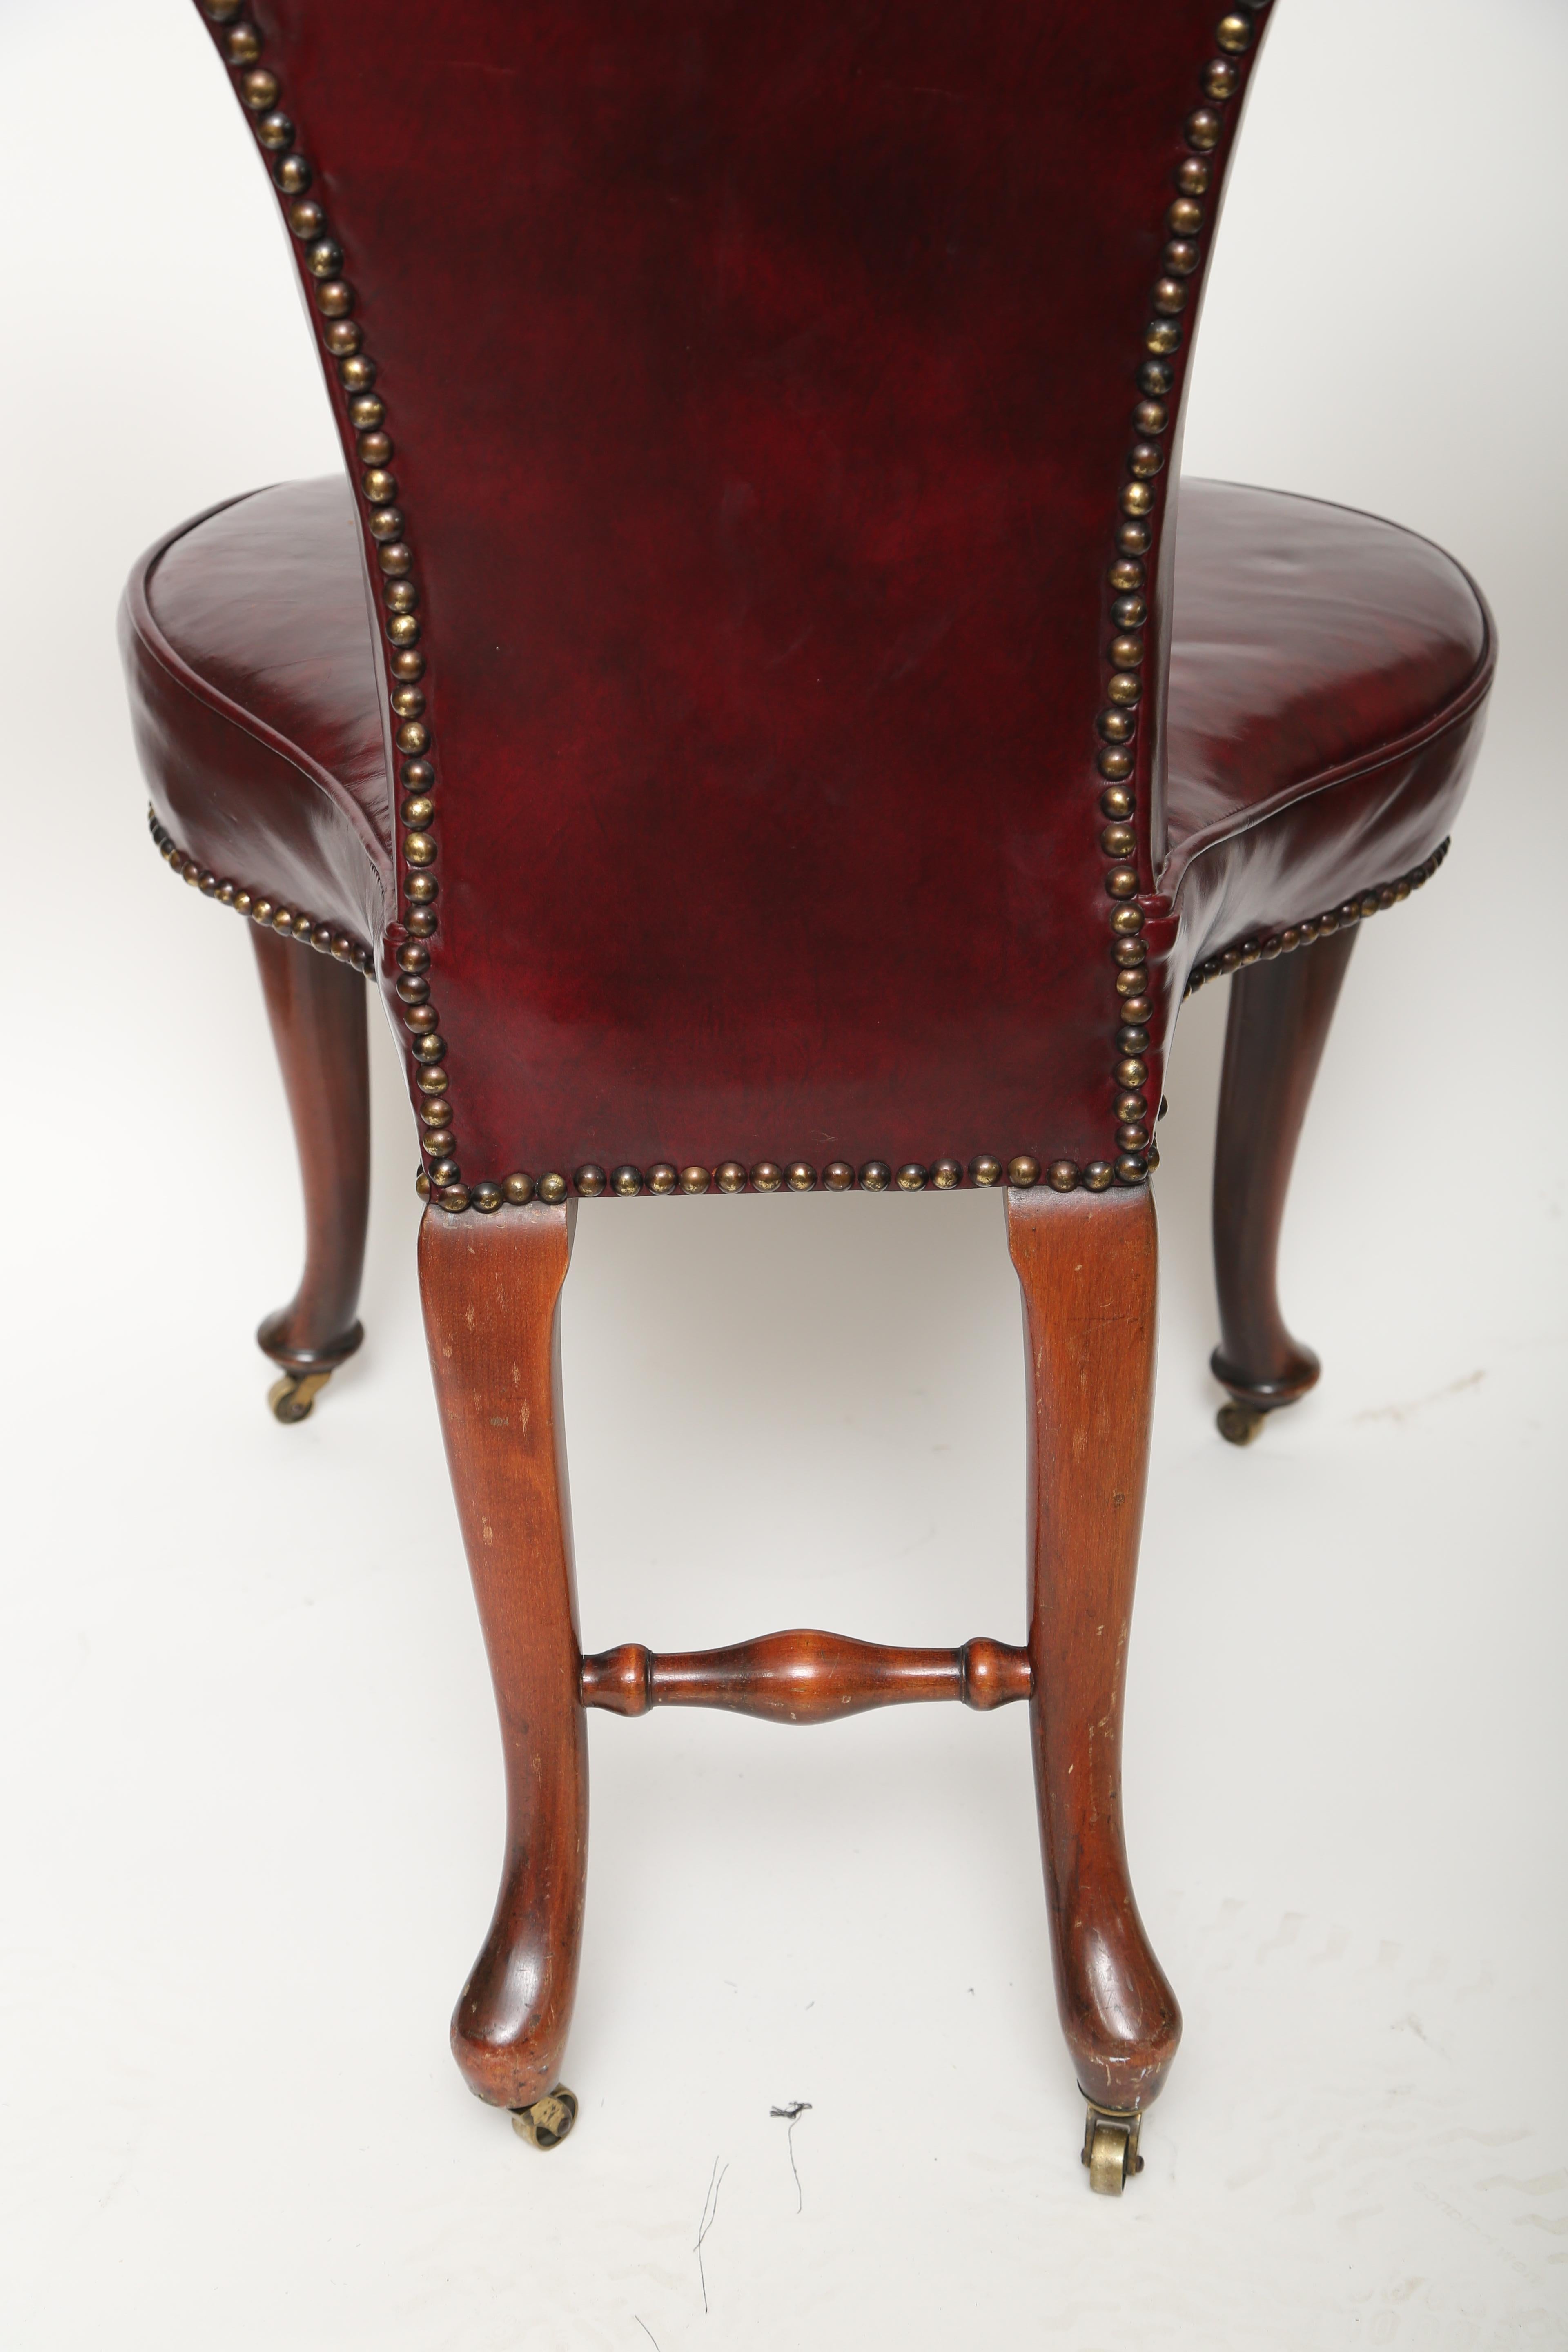 Hand-Crafted English Cock Fighting Chair-Mahogany, Red Leather, Brass Nailheads-Eng., 19th c